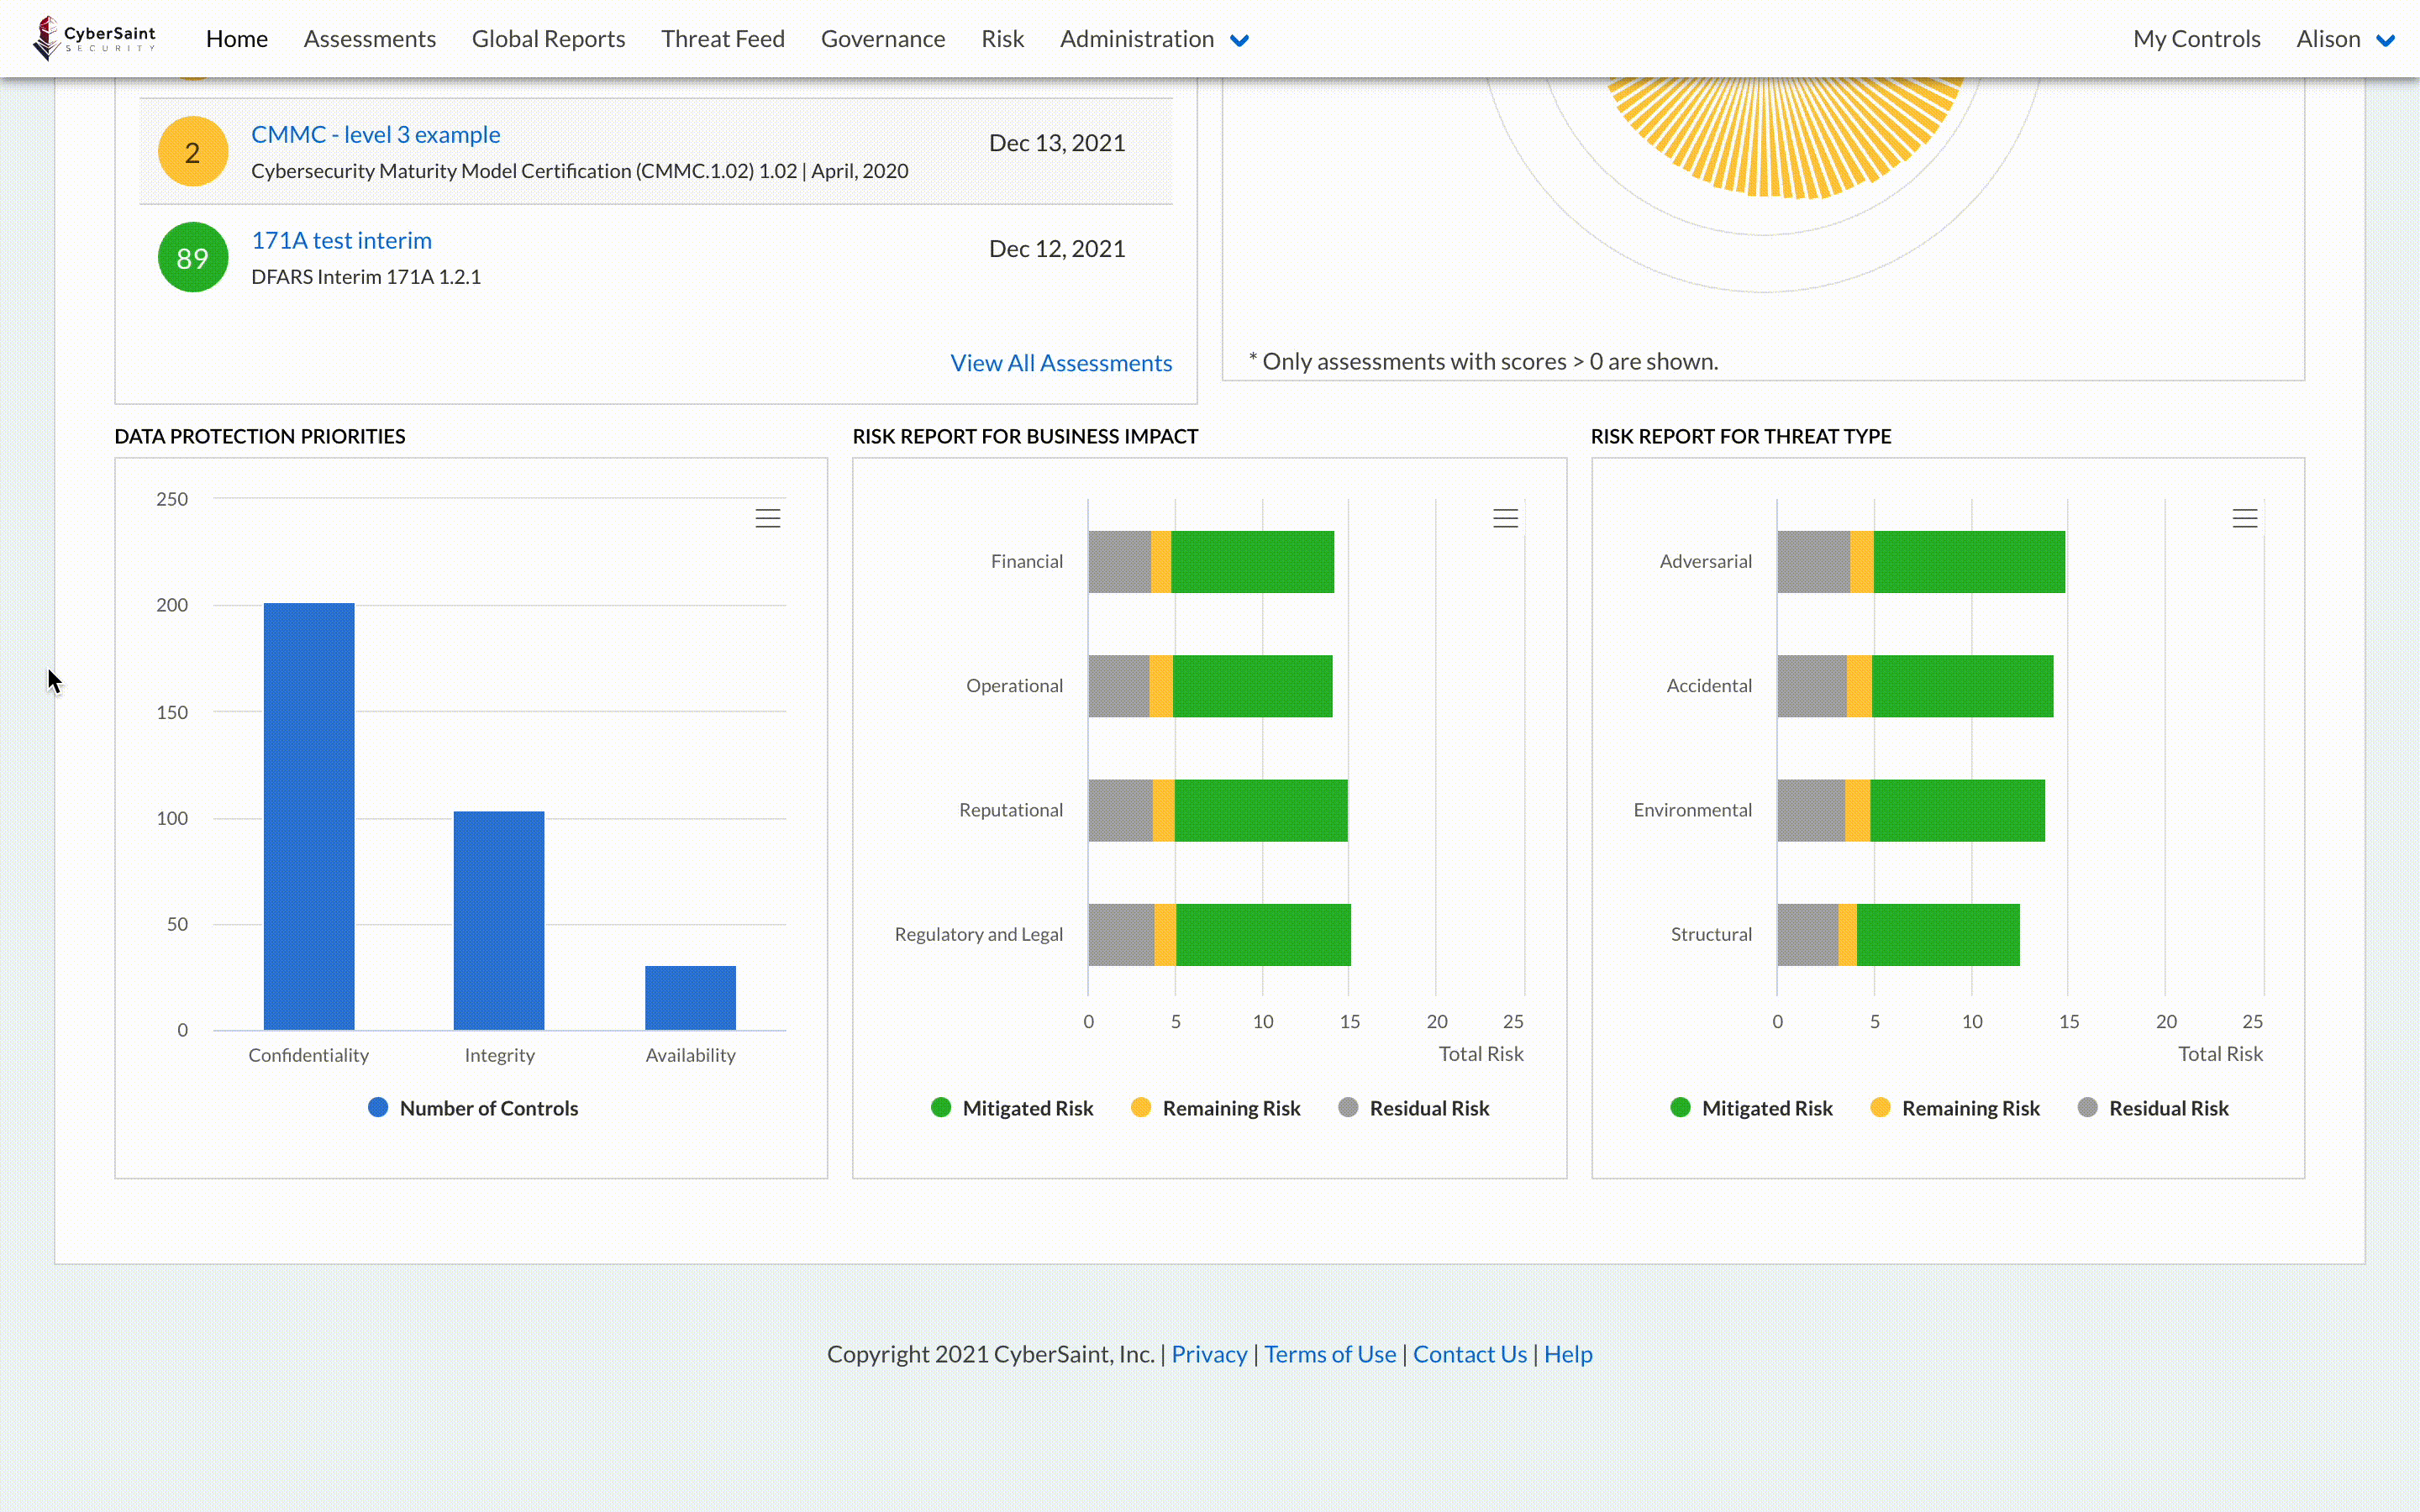 final Cyber Dashboards - CIA, Business Impact, Threat Type